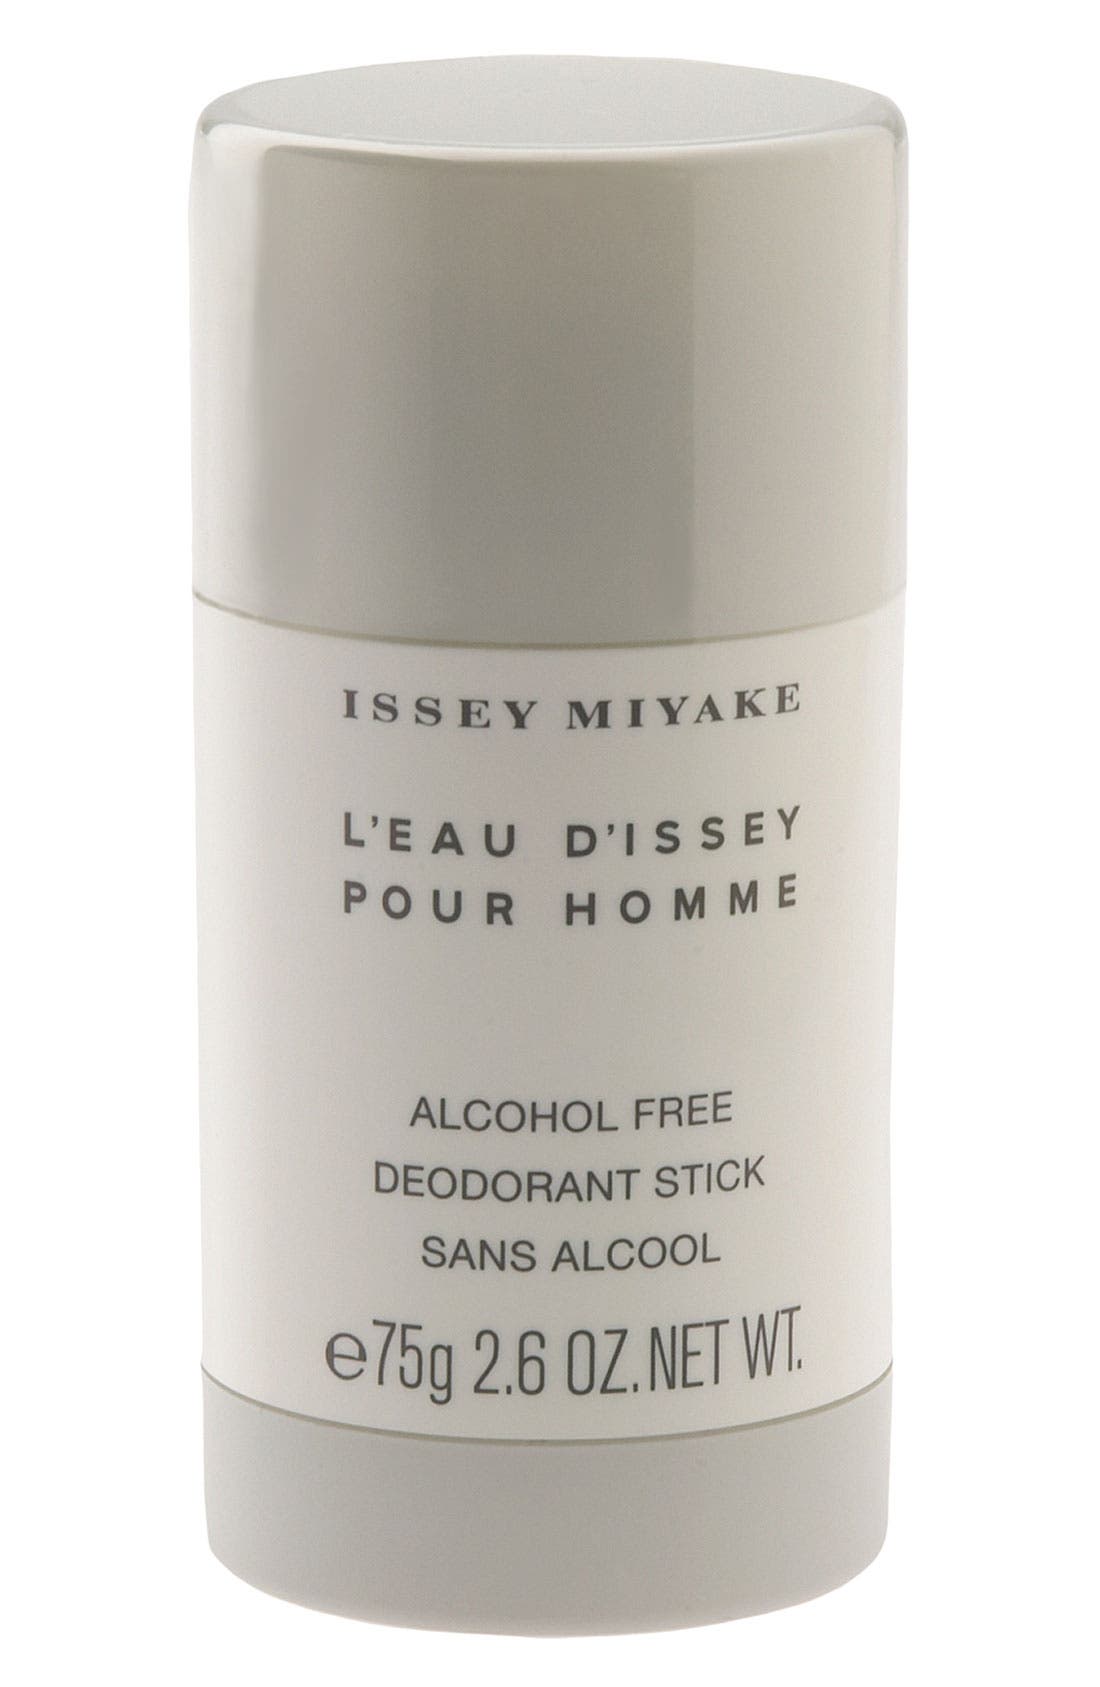 Issey Miyake L'Eau d'Issey pour Homme Deodorant Stick at Nordstrom